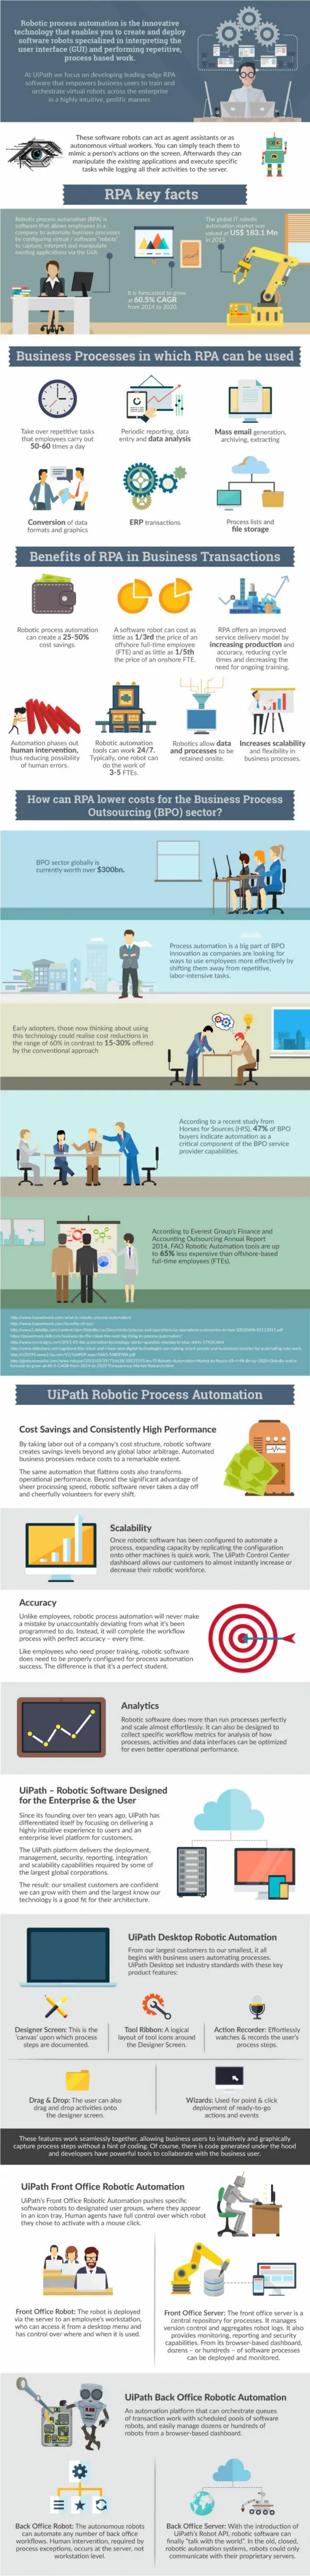 The Robotic Process Automation Infographic